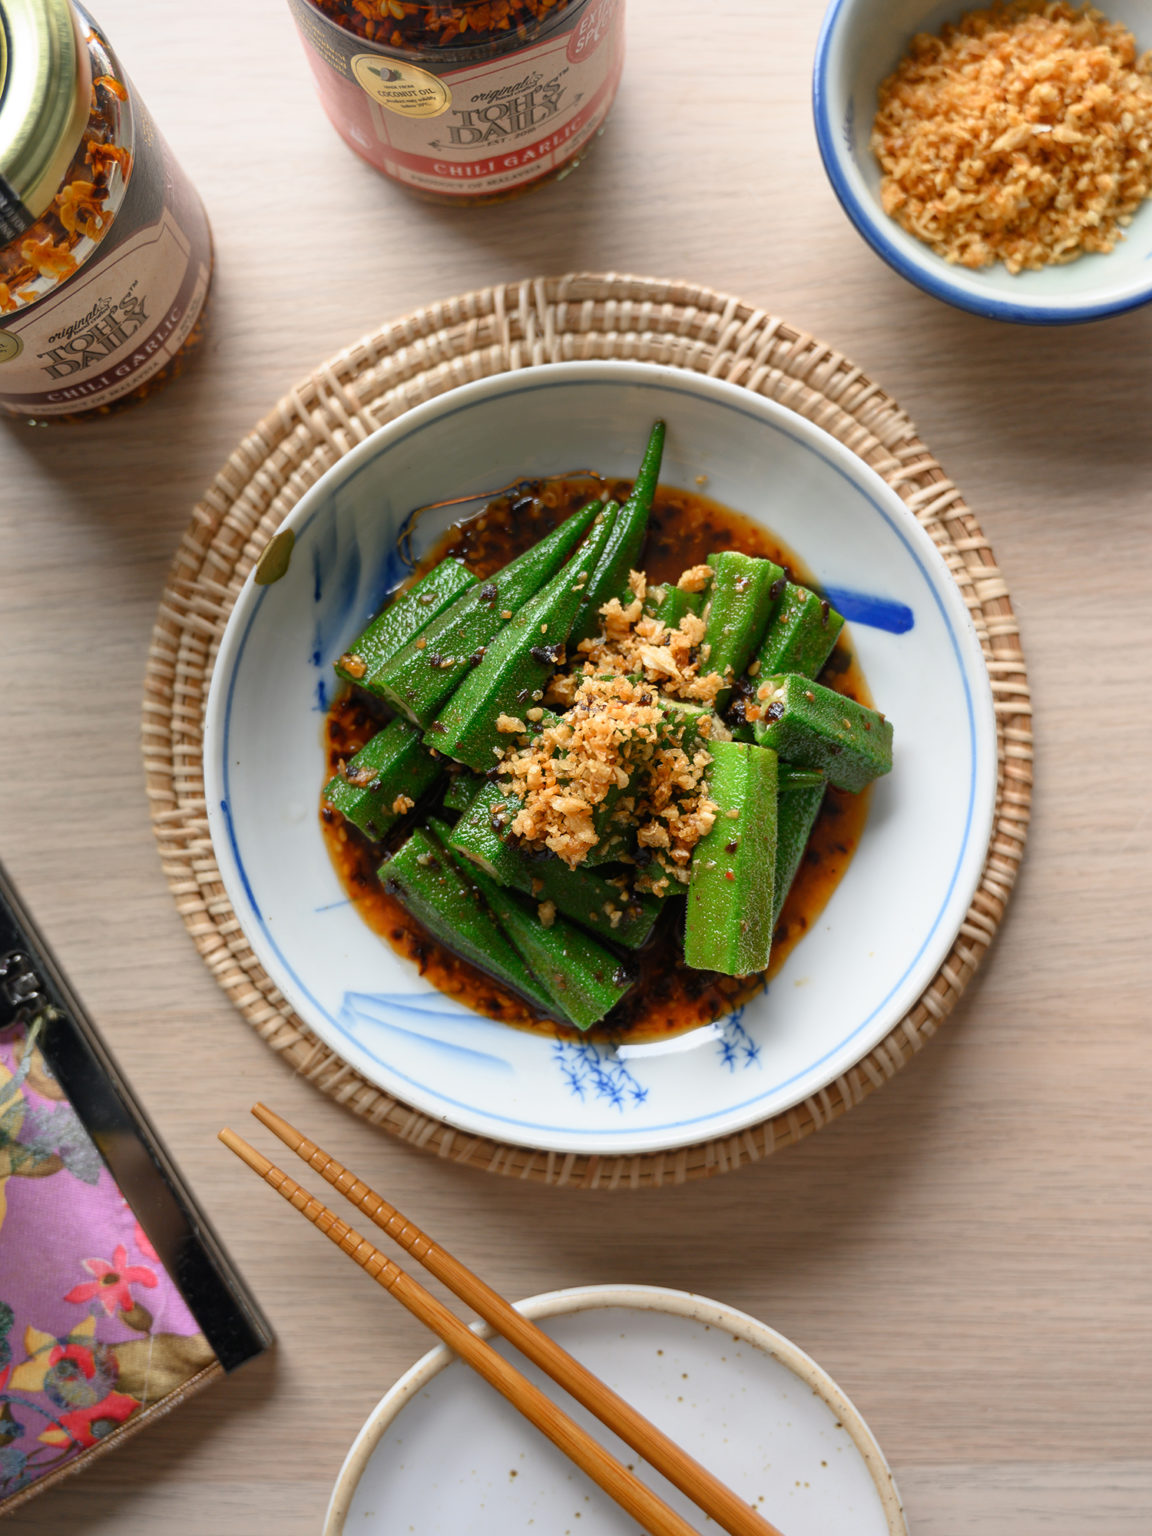 Okra in Spicy Oyster Sauce - Toh's Daily